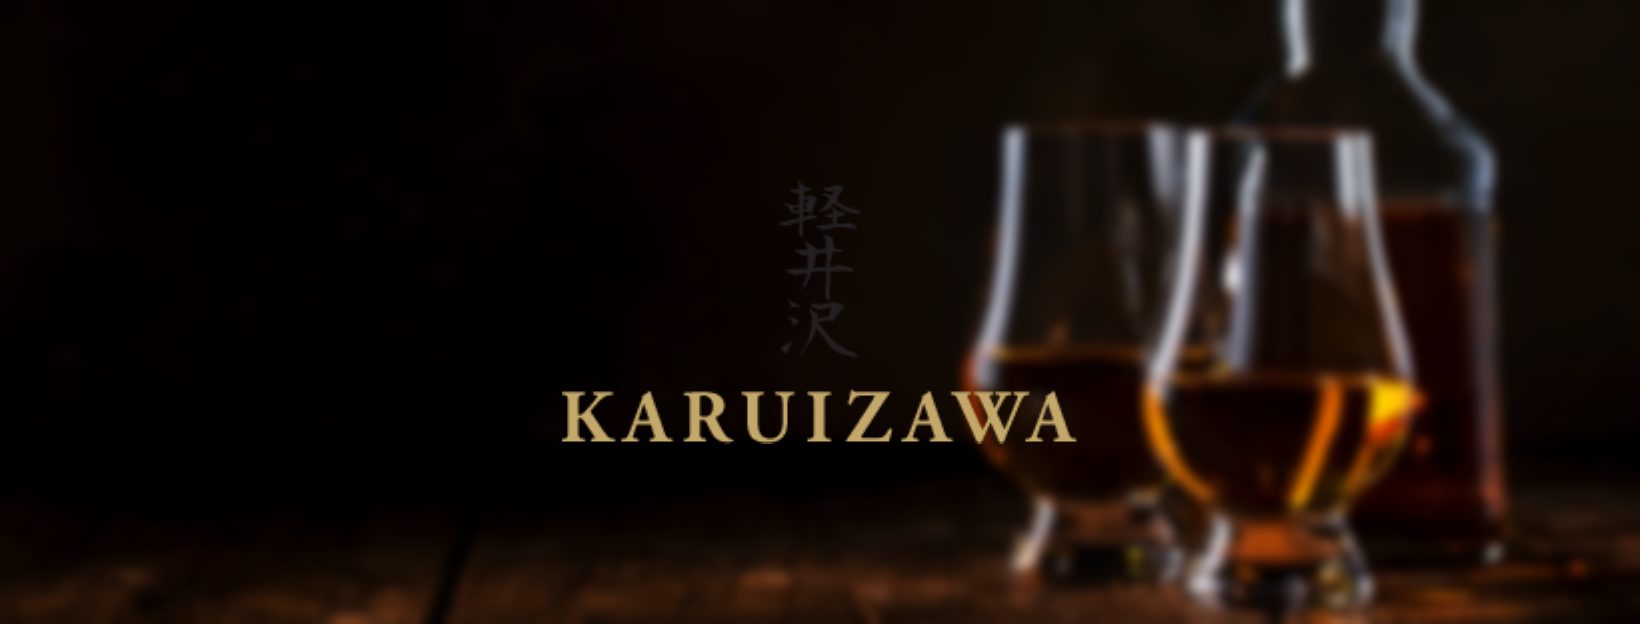 THE WORLD’S RAREST WHISKY – KARUIZAWA’S ‘THE LAST MASTERPIECE 1970’ Auctioned as NFT